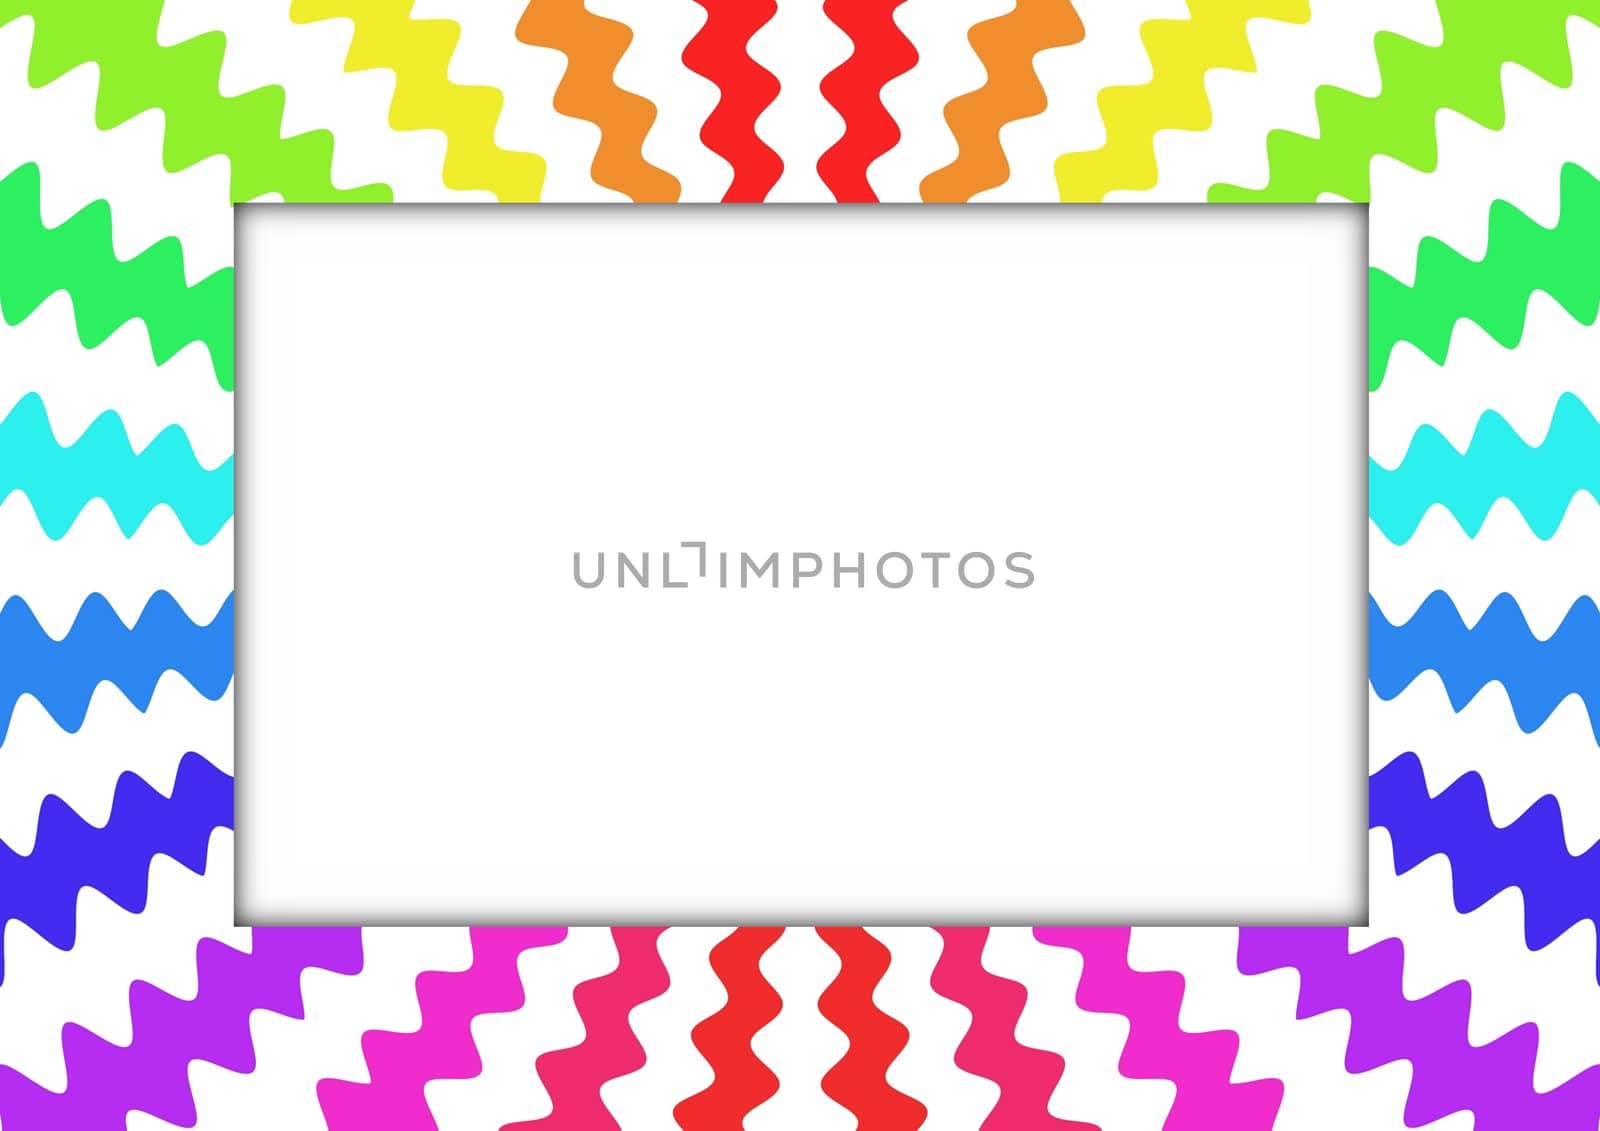 Illustration of a frame made of colourful zigzag pattern